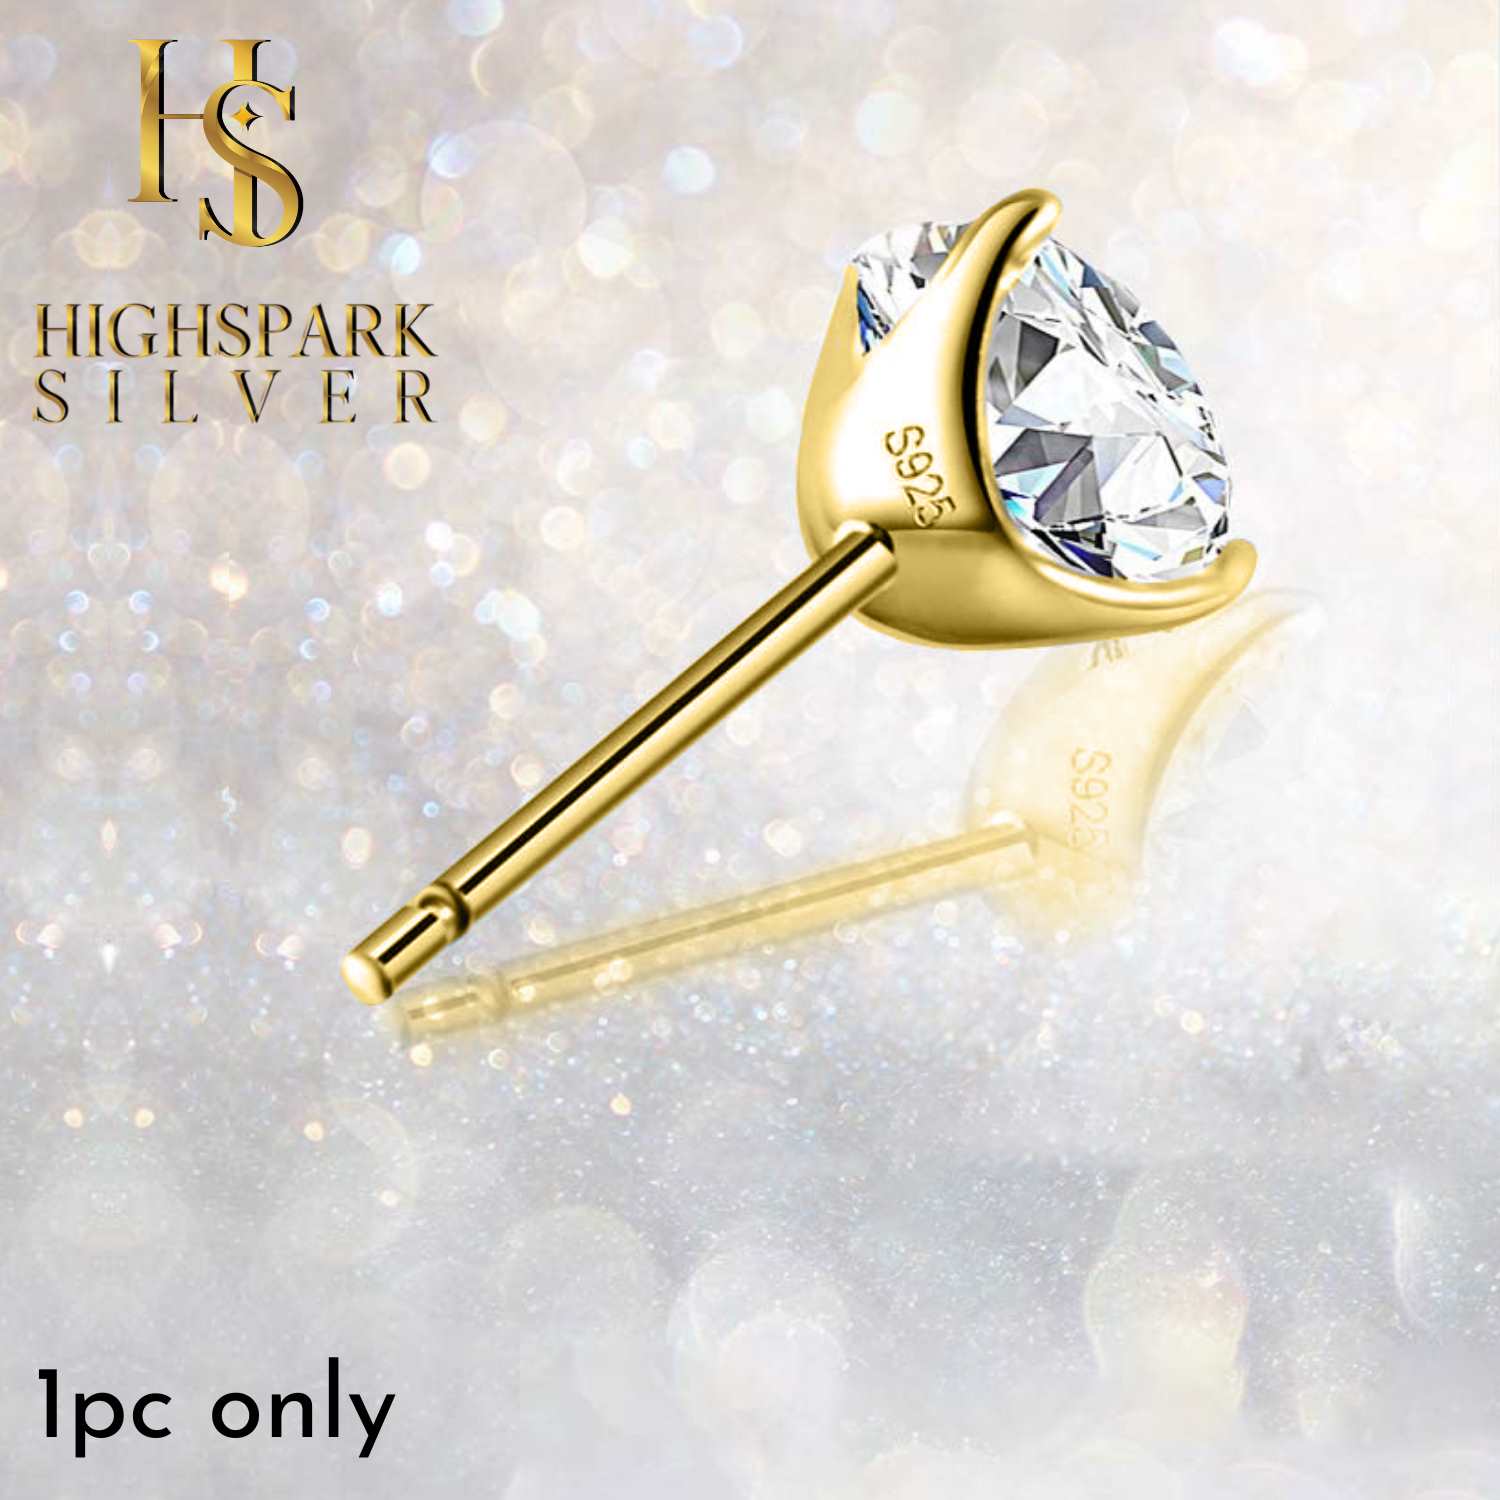 Mens Gold Solitaire Stud Earrings in 92.5 Silver - 1 piece - Sparkling Martini by HighSpark - Sparkling Swiss Zirconia in Martini Style 3 Prong Setting - 18K Gold Finish